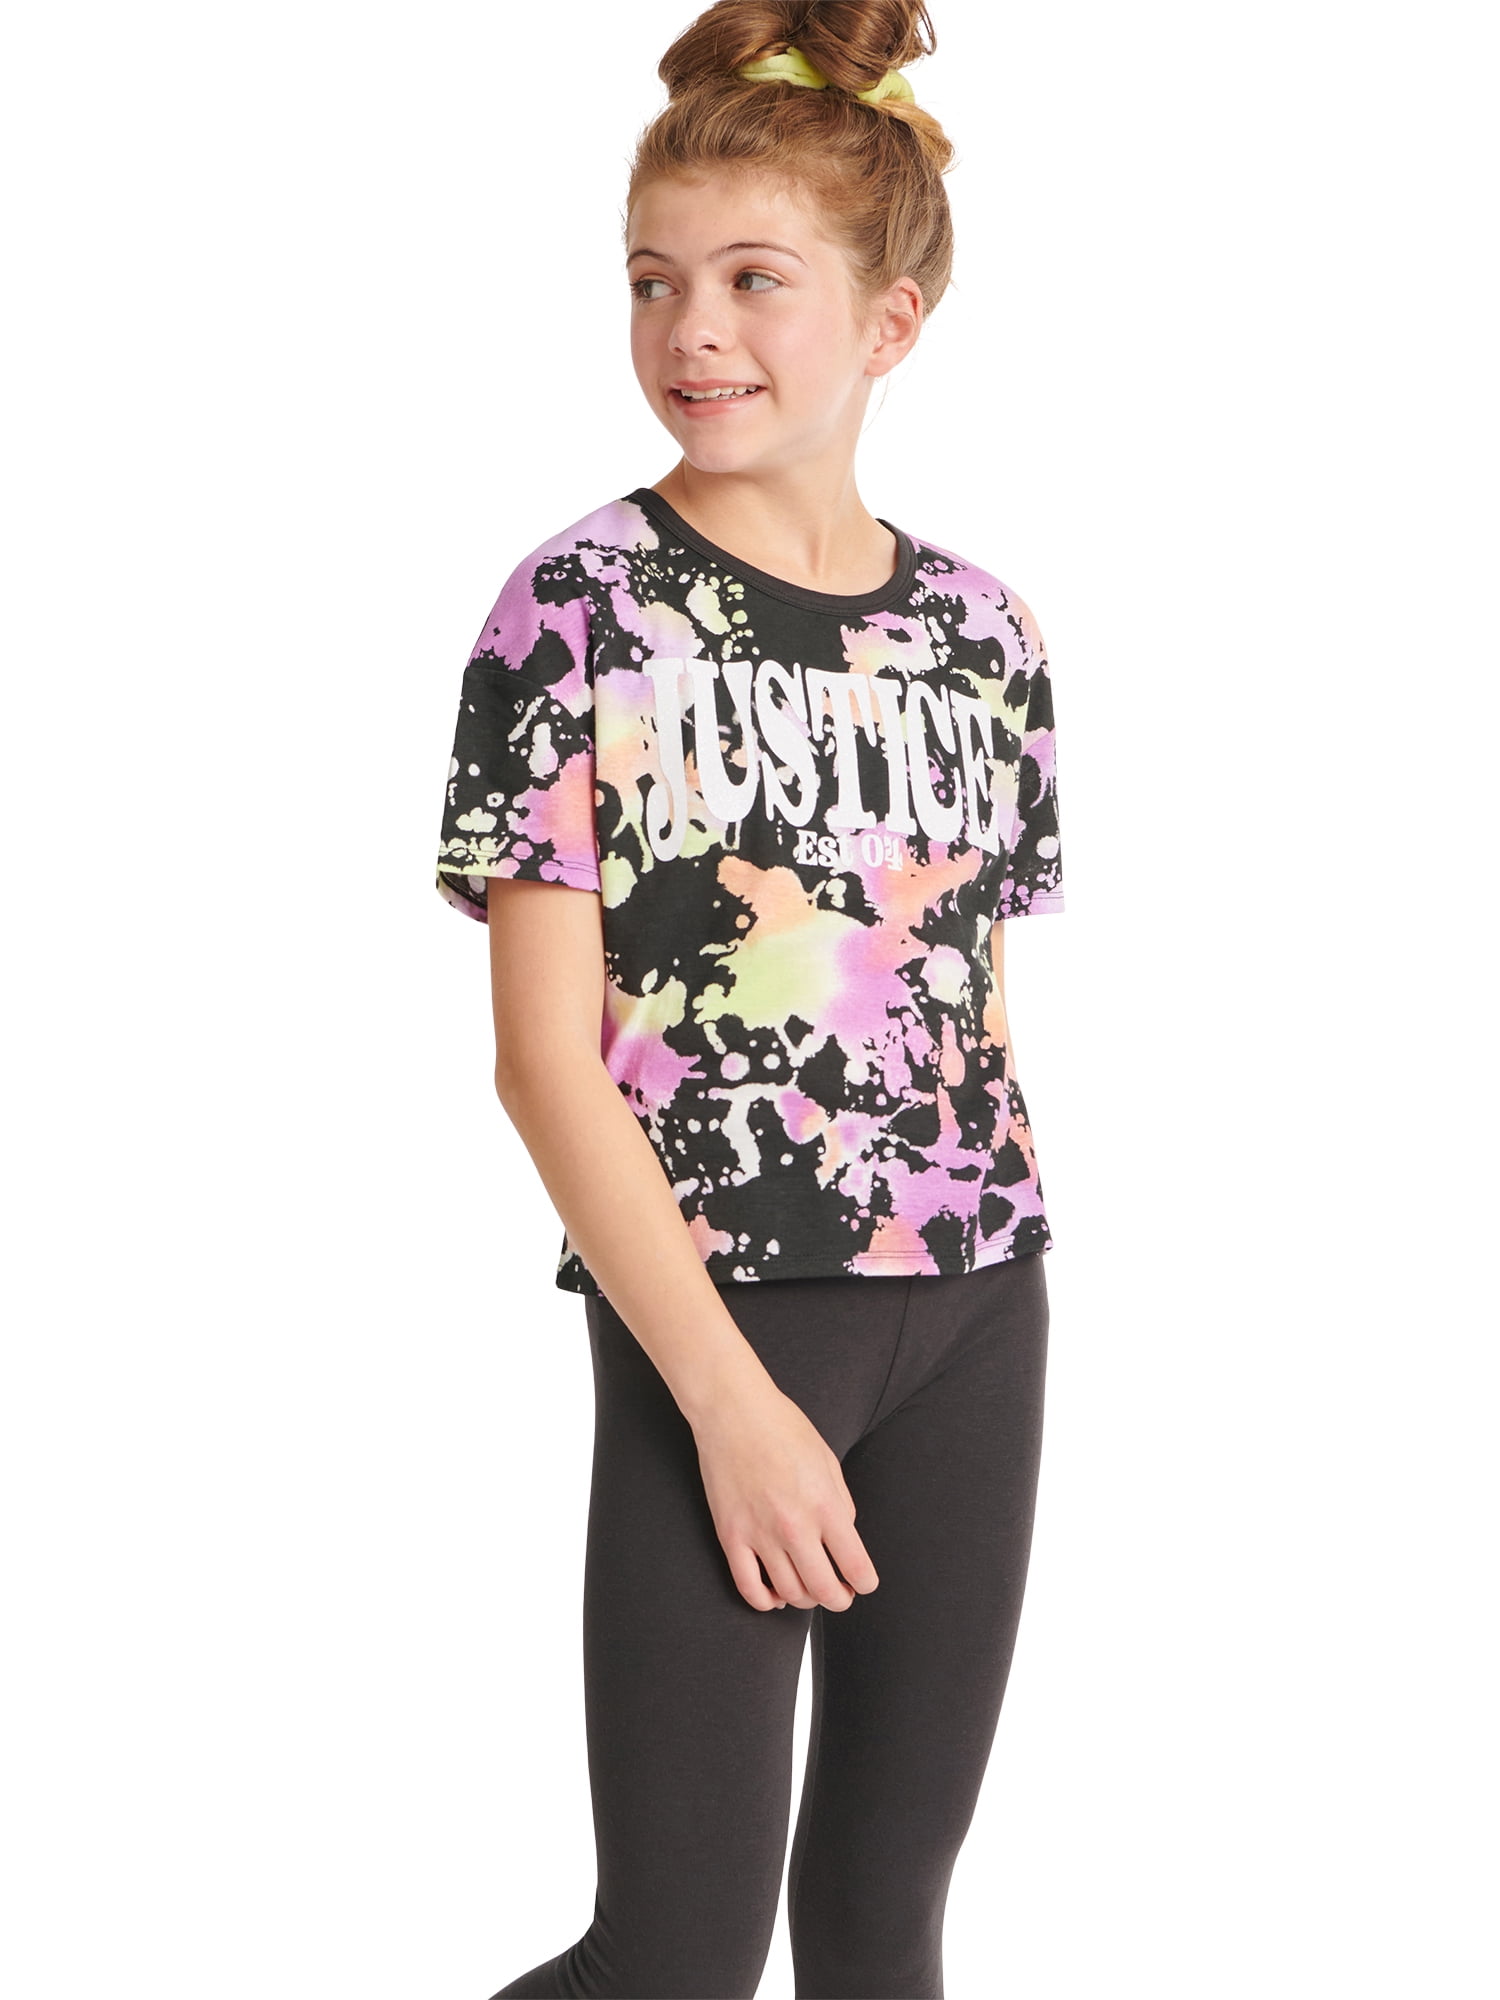 Justice Girls Everyday Faves Short Sleeve Graphic Logo Tee, Sizes 5-18 & Plus